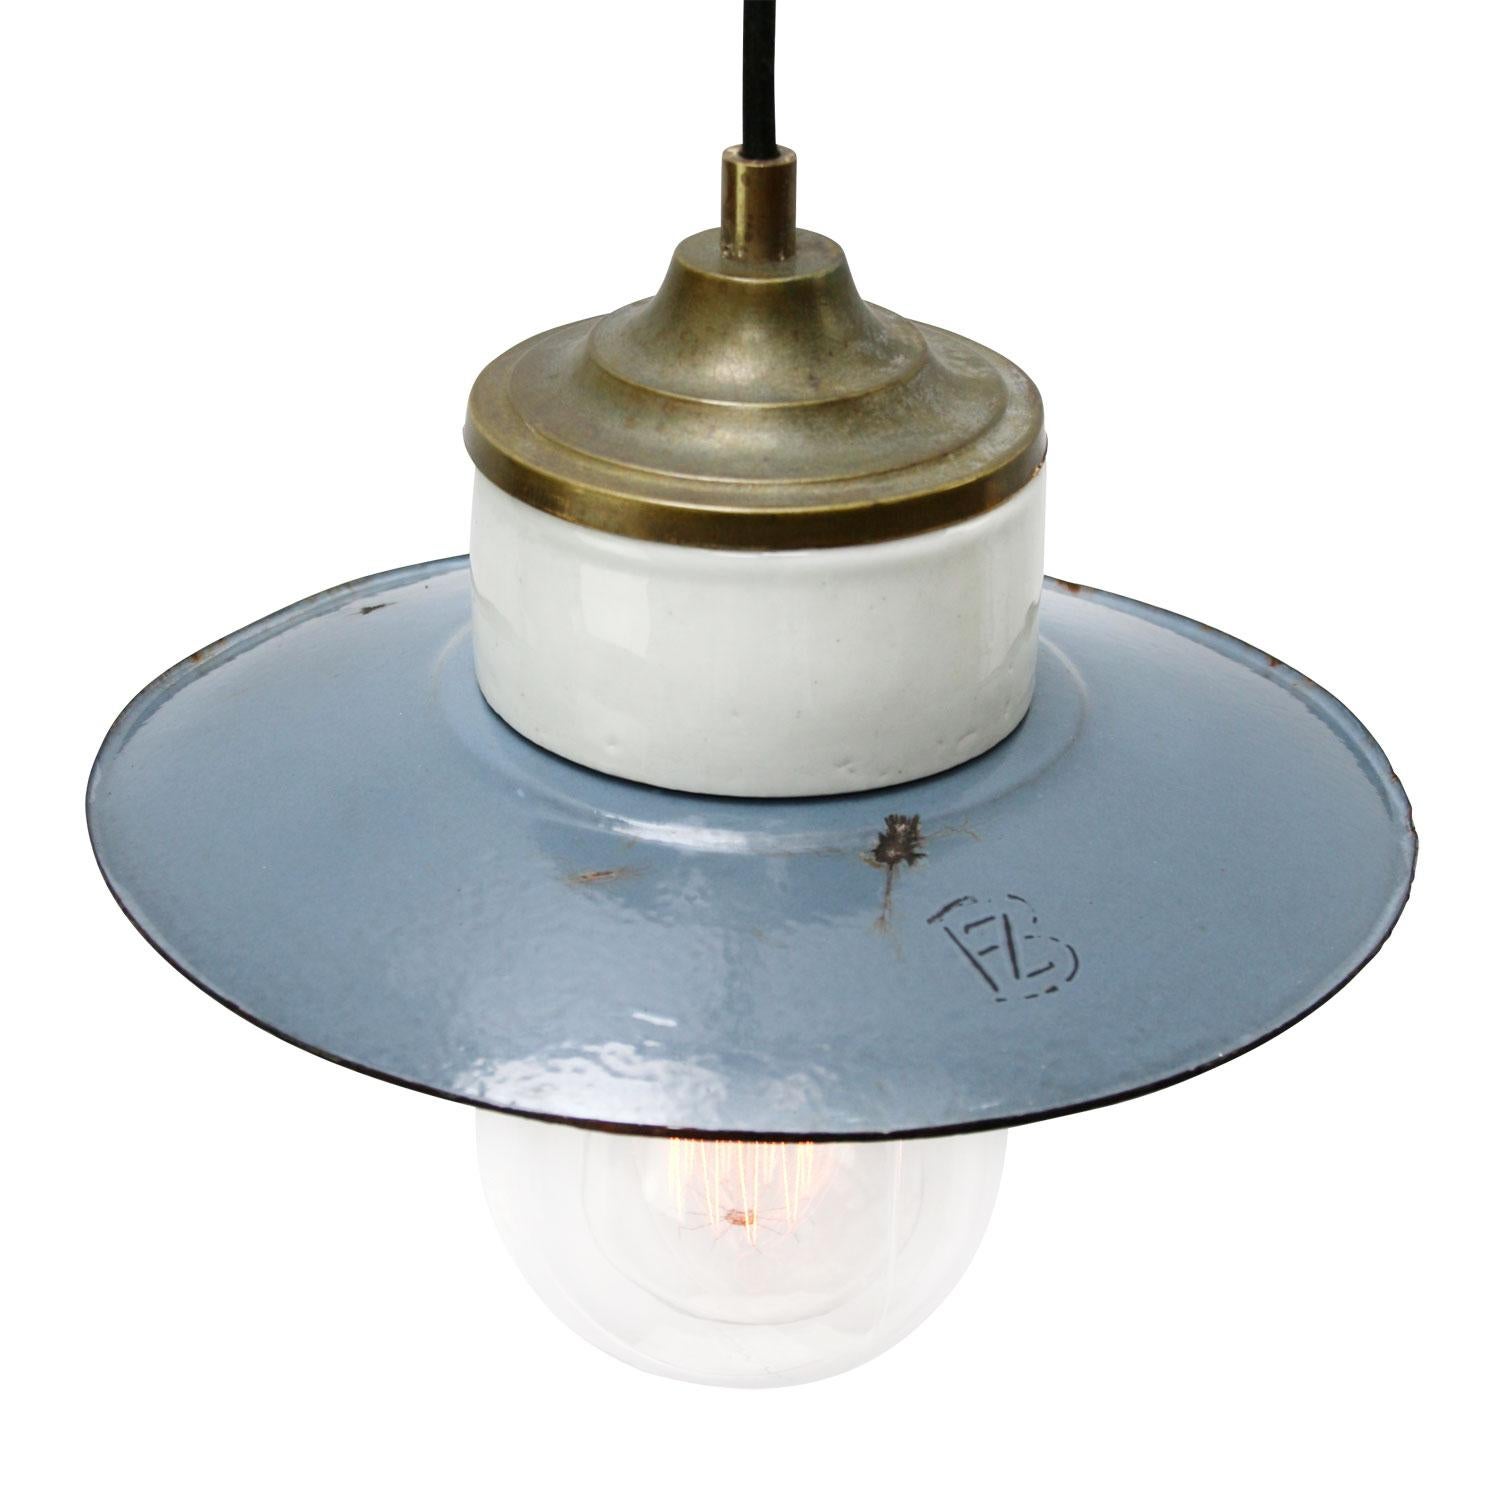 Porcelain Industrial hanging lamp.
White porcelain, brass and clear glass.
Blue greyish enamel shade.
2 Conductors, no ground.

Weight: 1.40 kg / 3.1 lb

Priced per individual item. All lamps have been made suitable by international standards